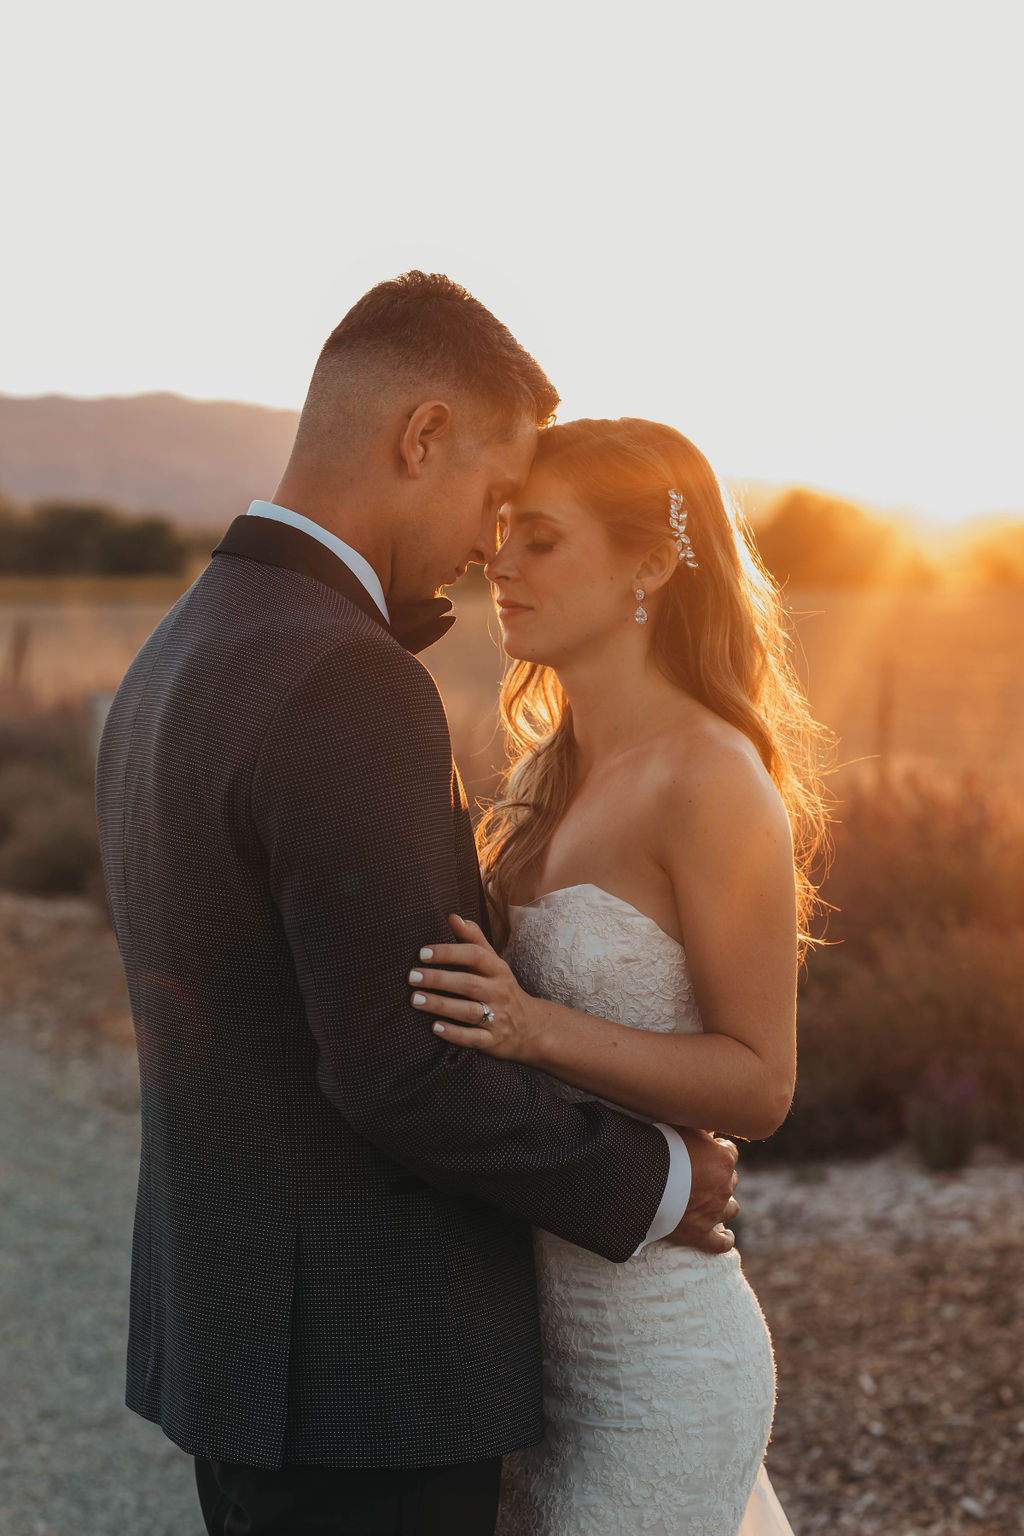 A bride and groom share a tender embrace outdoors in soft sunset lighting at Park Winters wedding venue